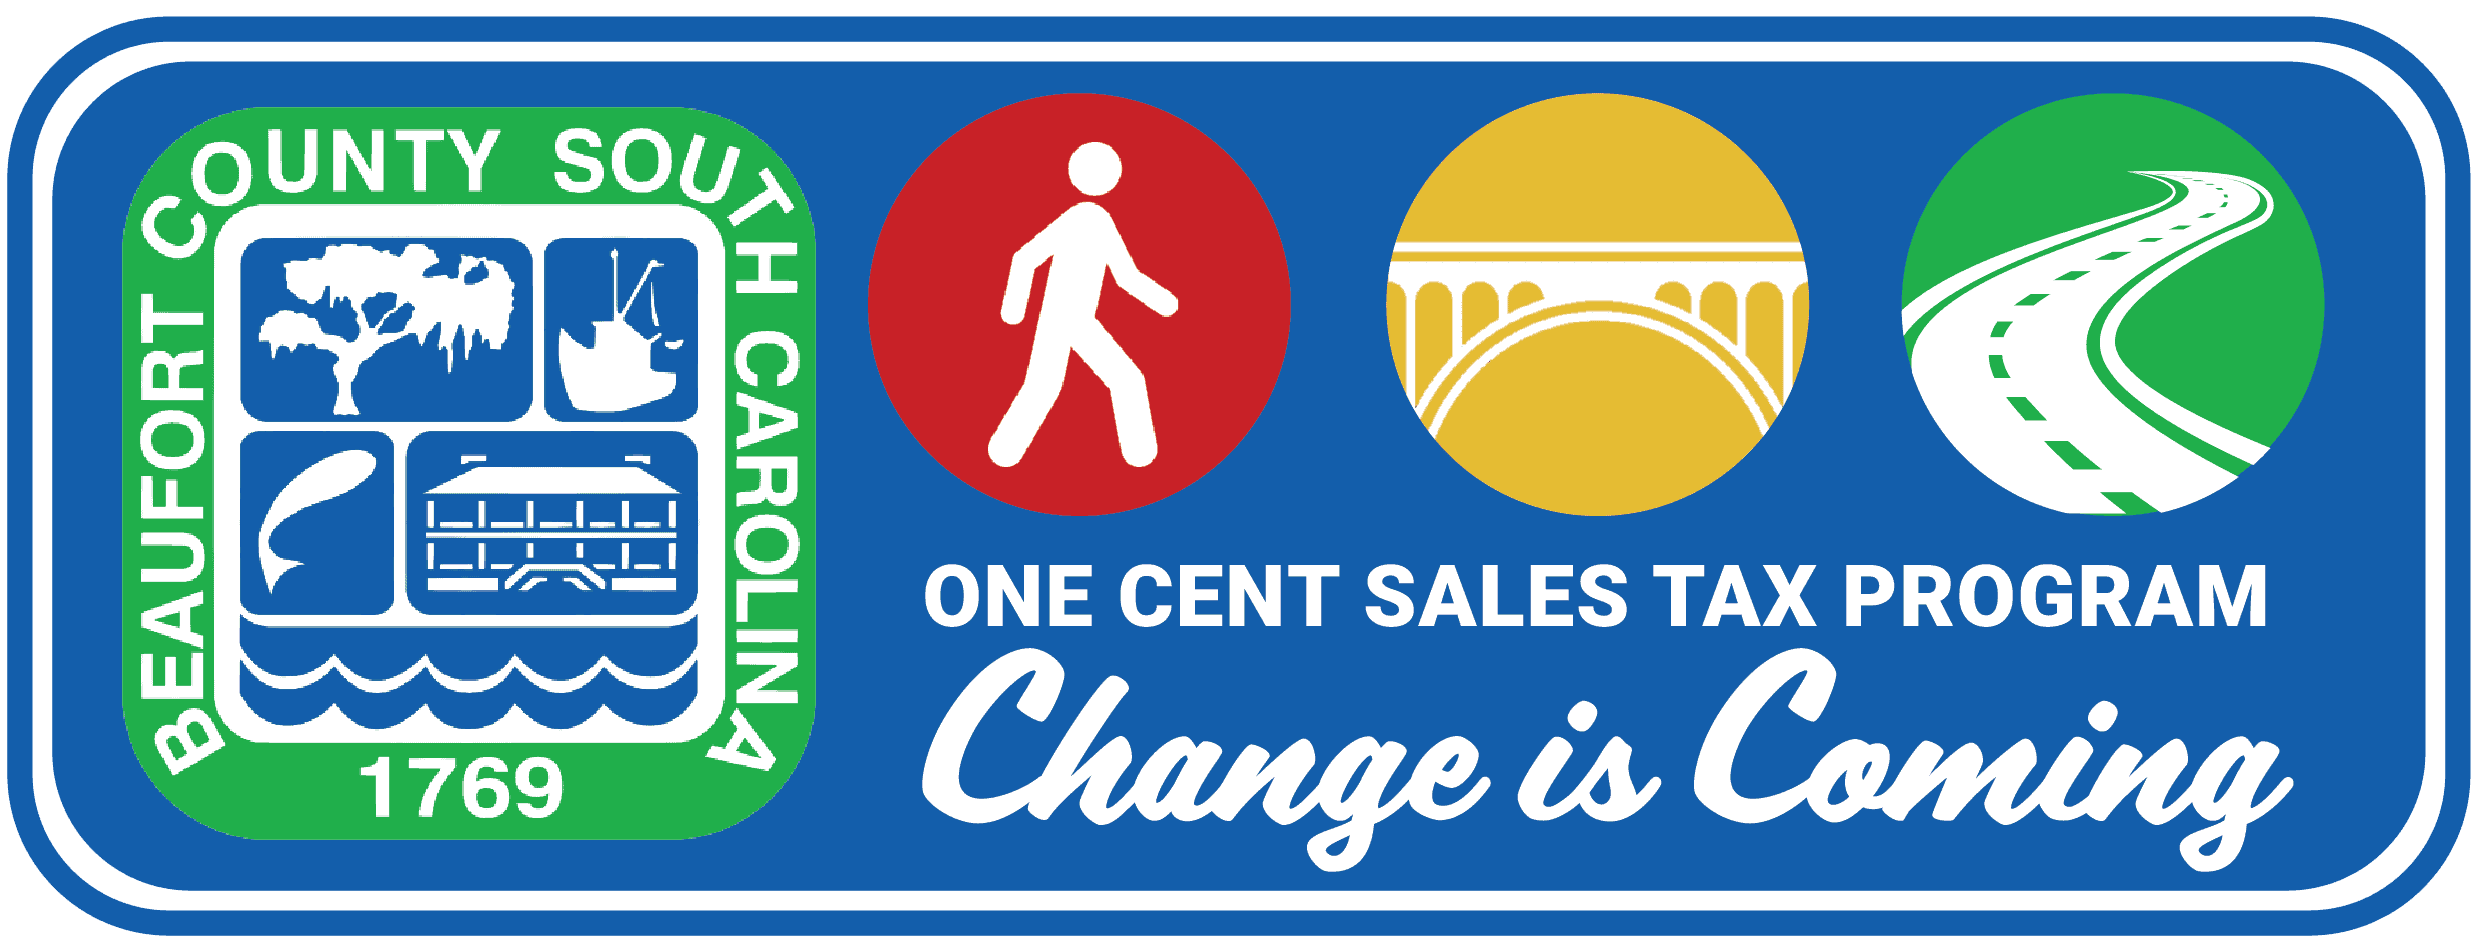 Beaufort County One Cent Sales Tax Program